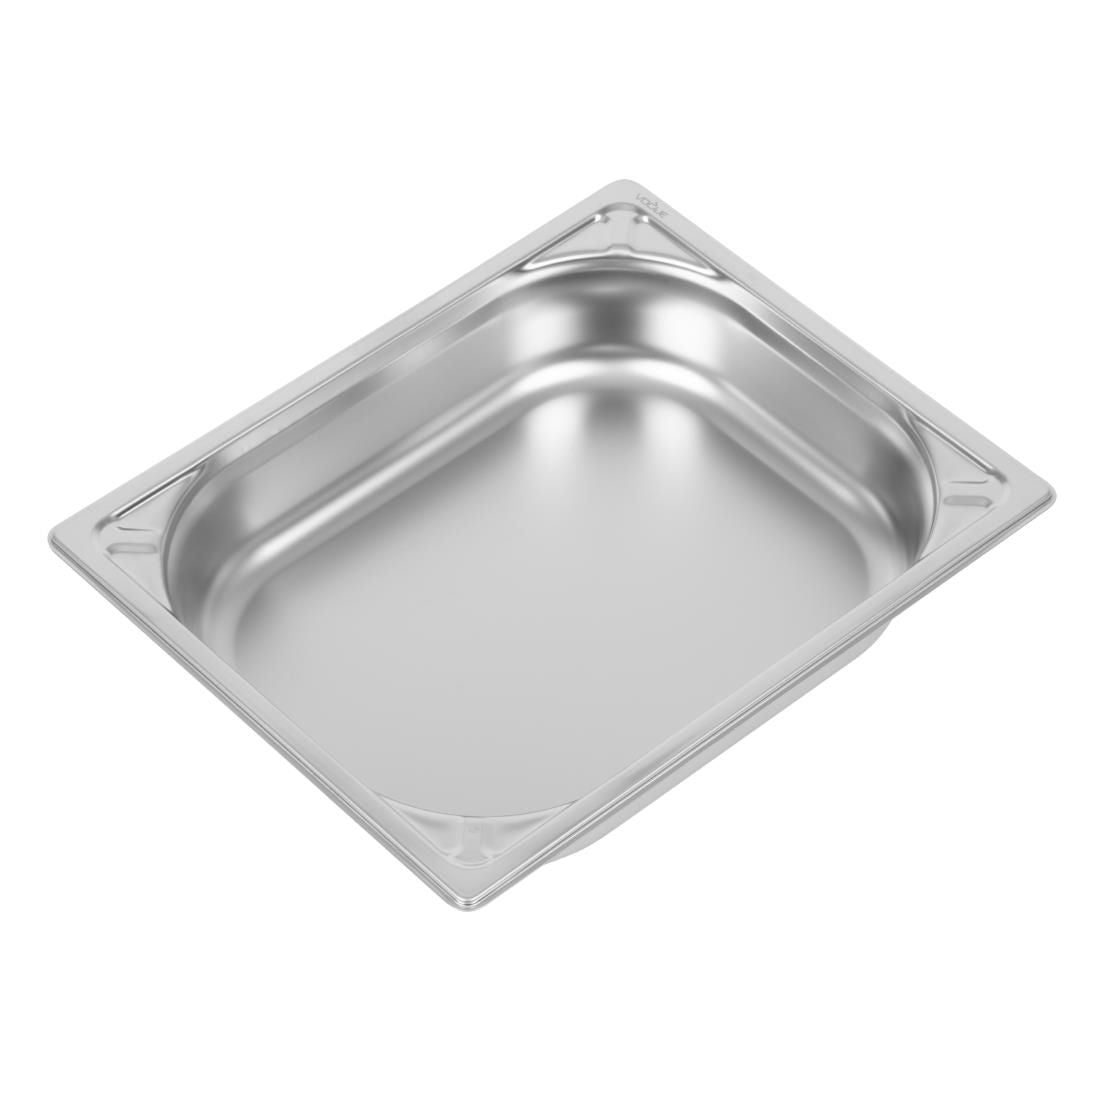 Vogue Heavy Duty Stainless Steel 1/2 Gastronorm Pan 65mm